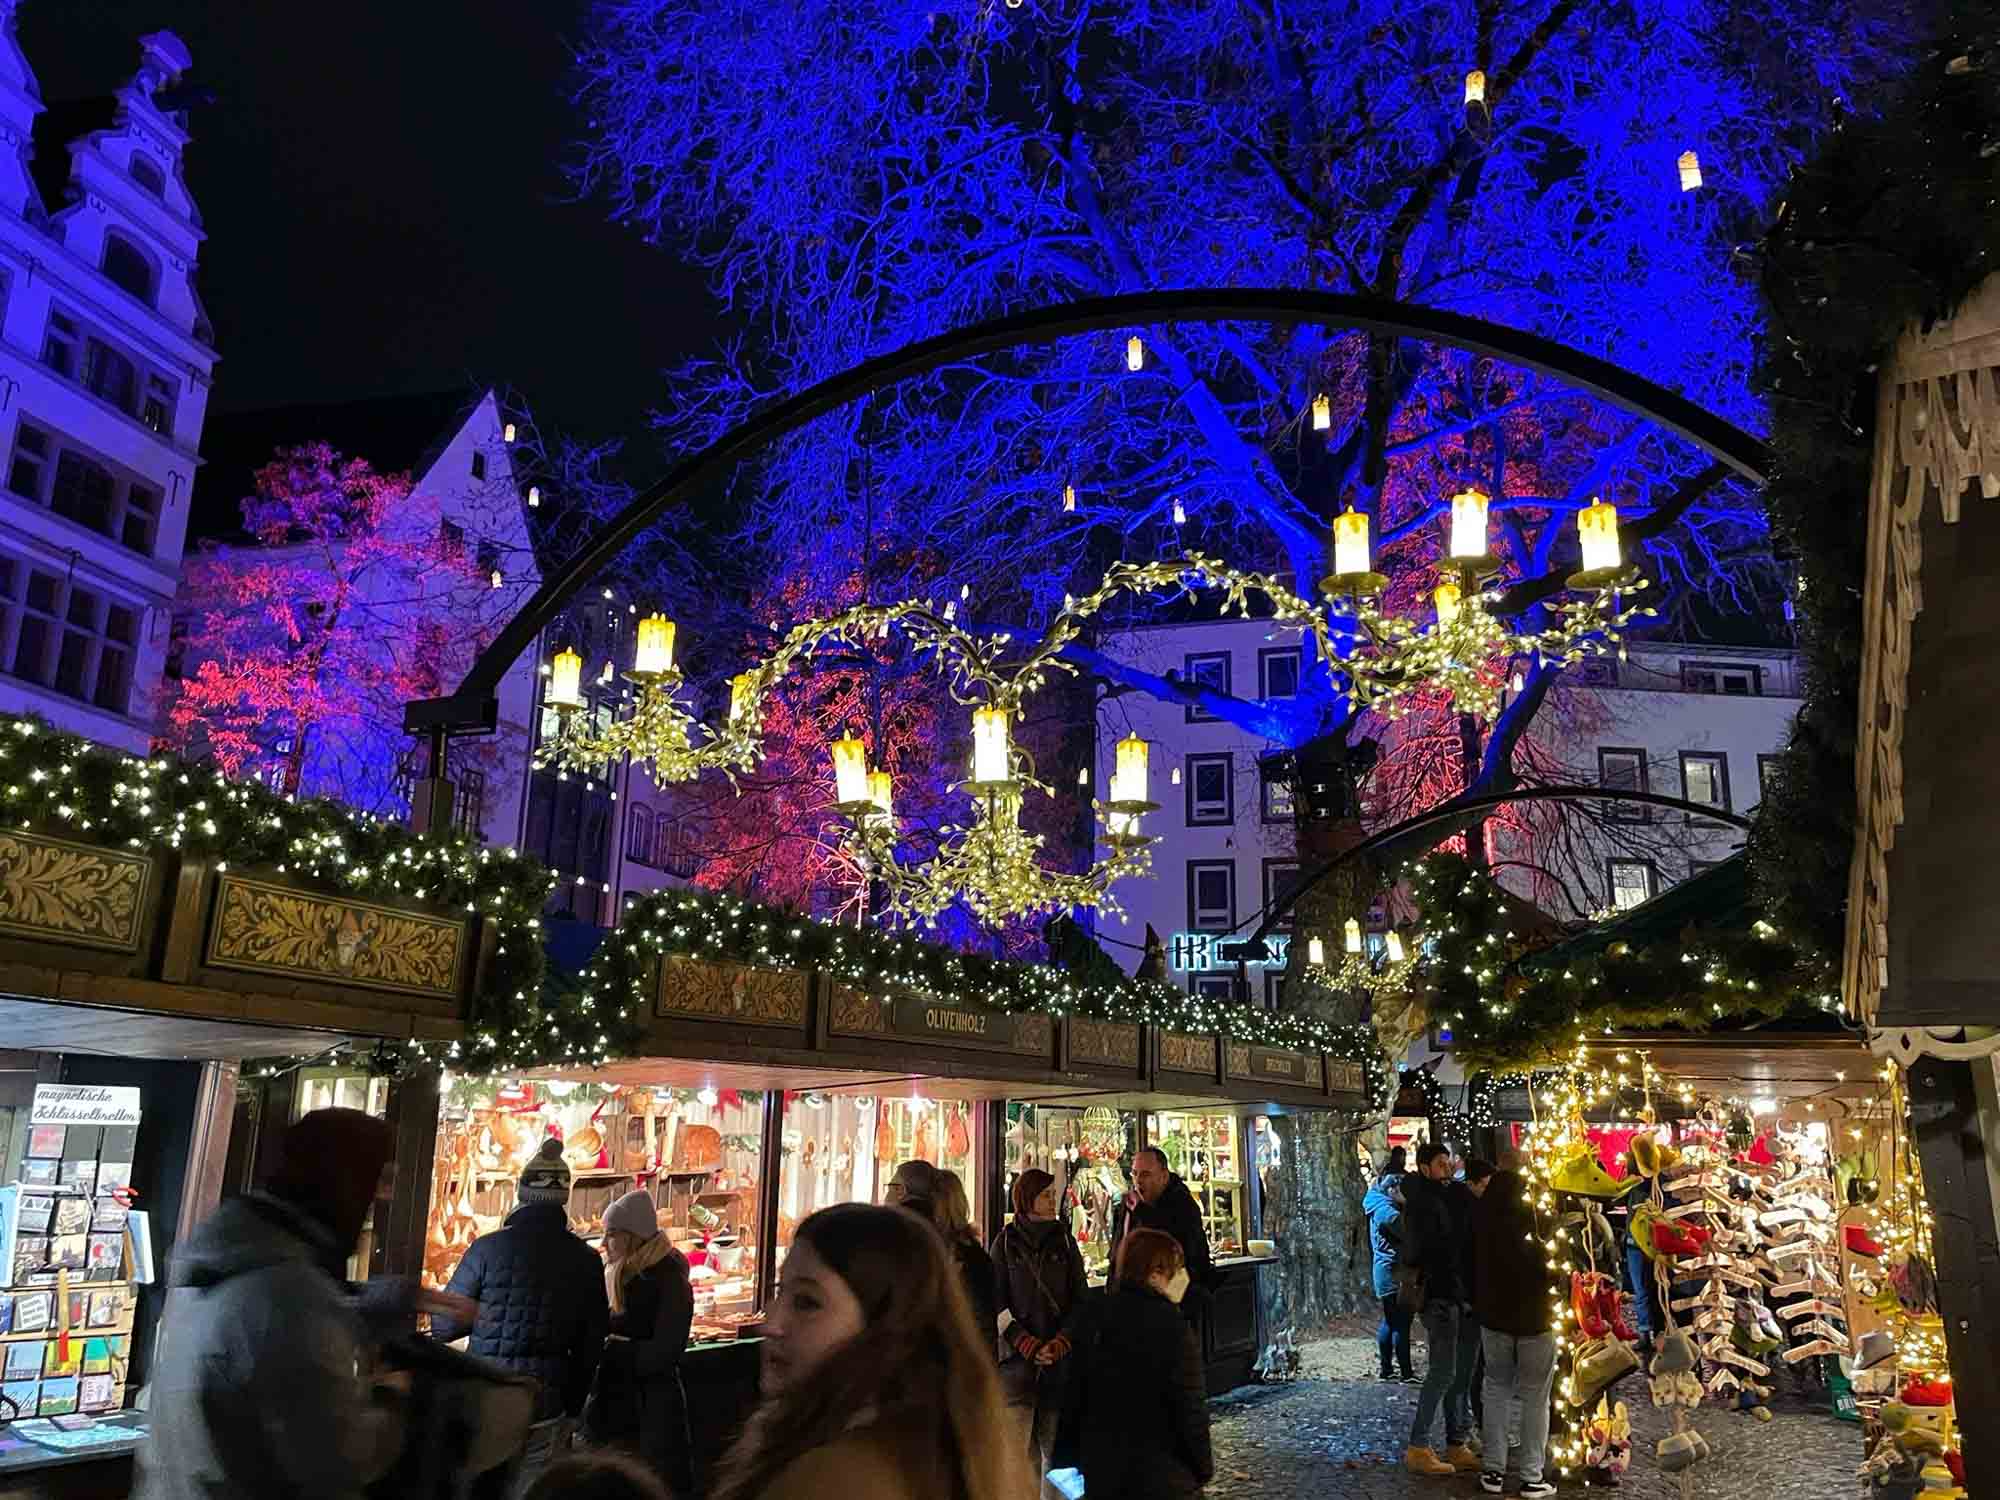 People shopping at a Christmas market at night beneath lights and candle chandeliers